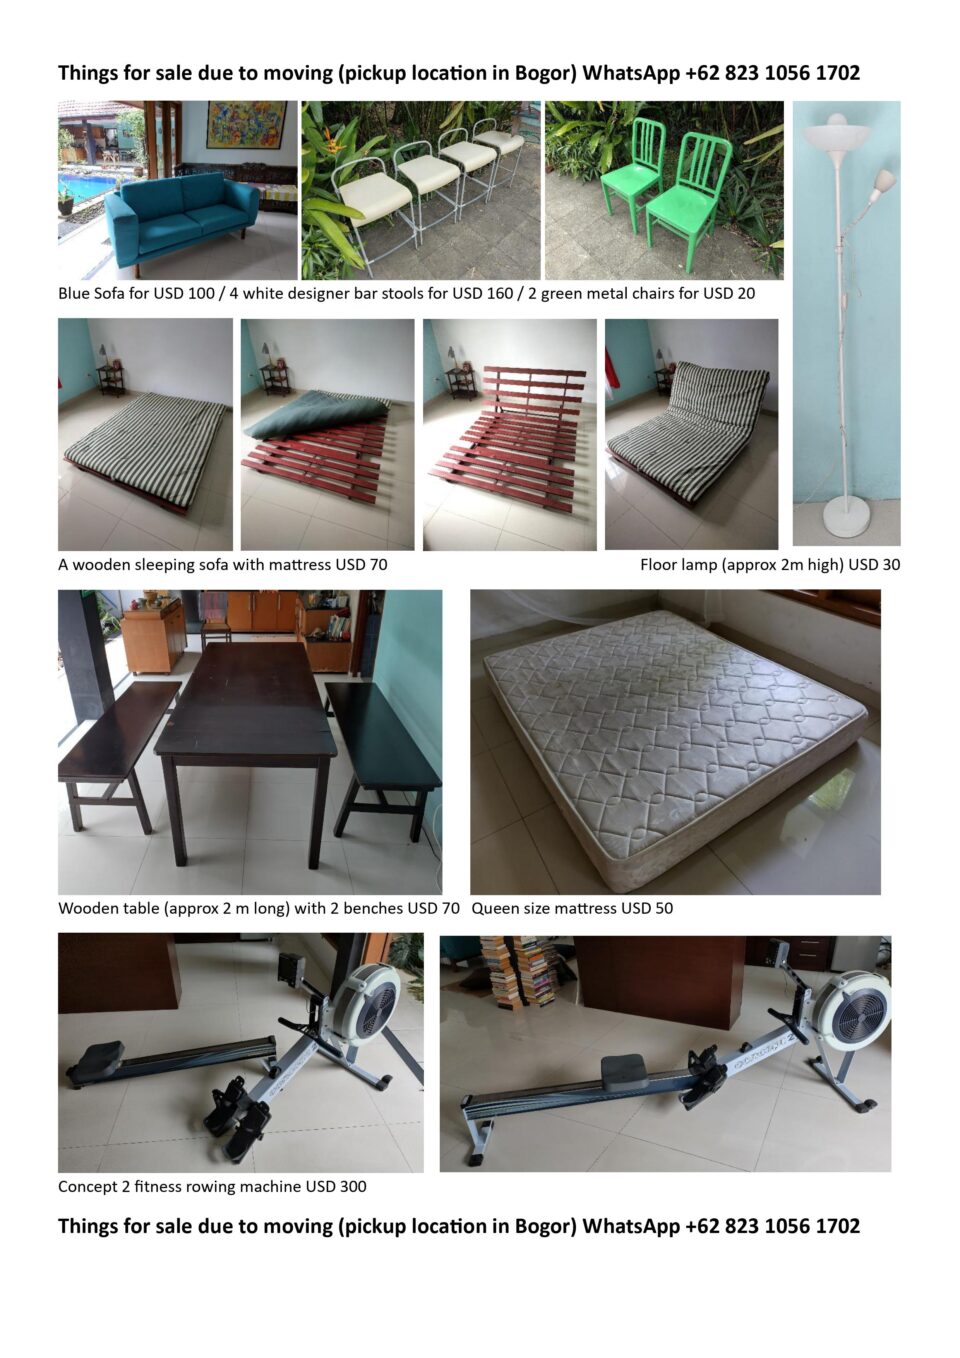 household furnishing and appliances for sale